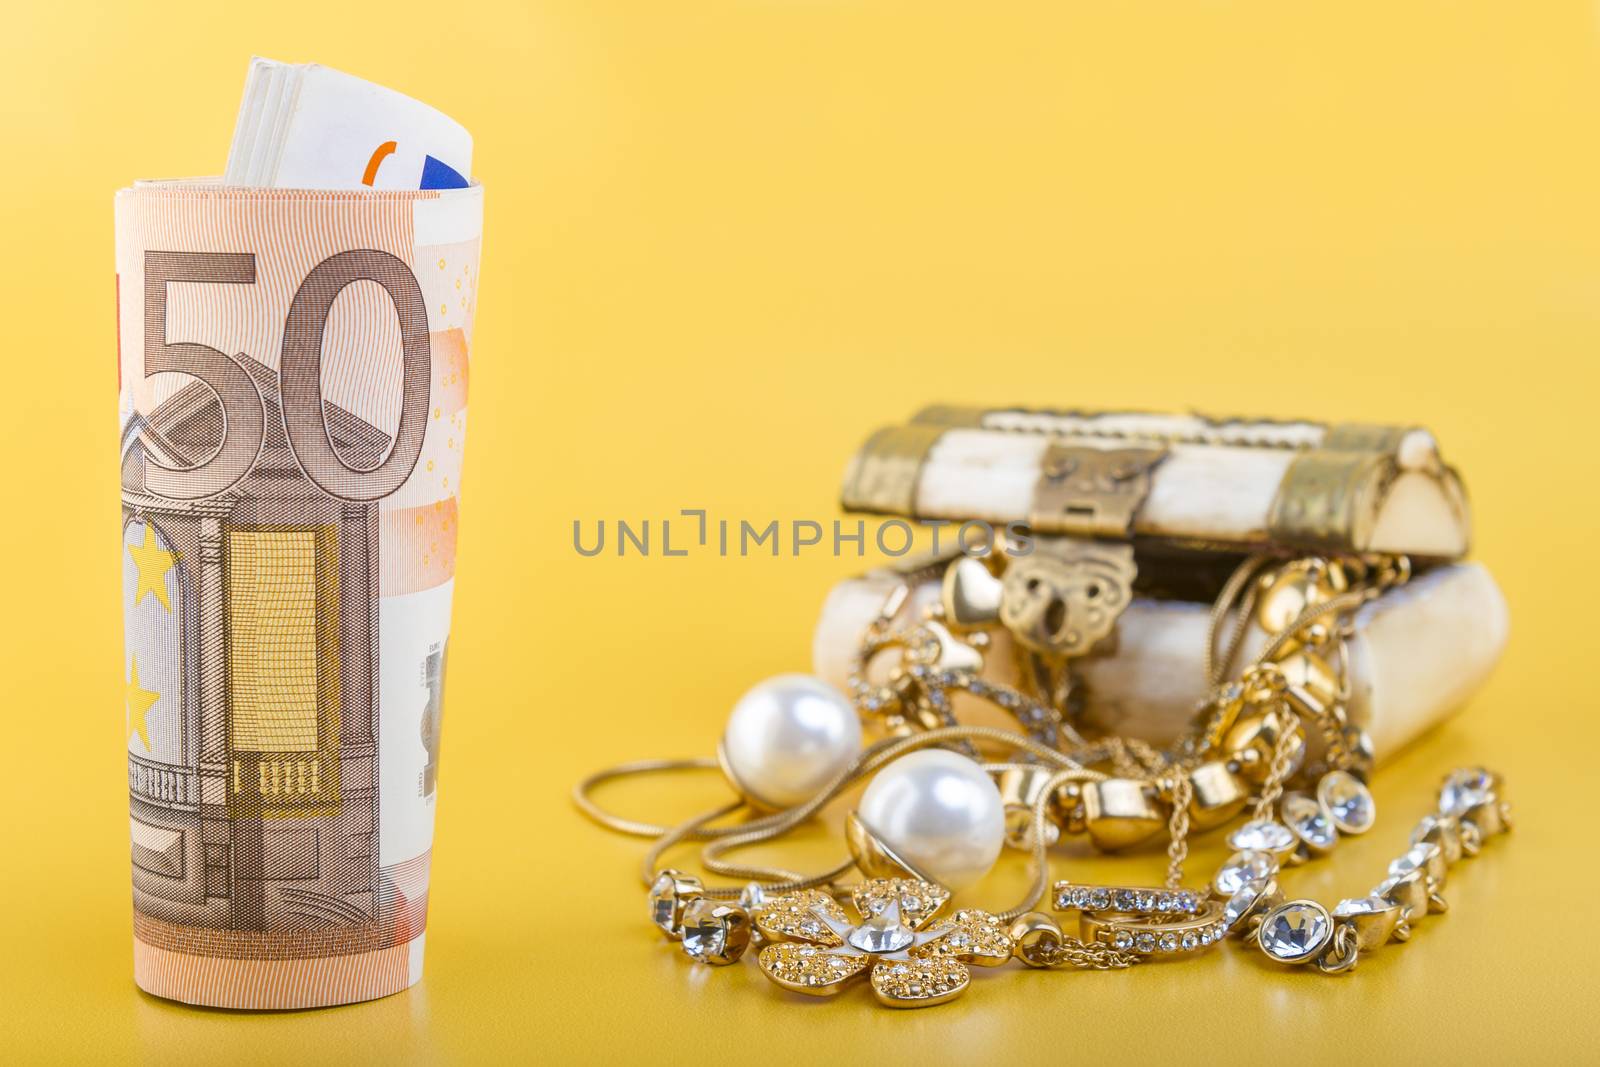 Cash for Gold Jewlery Concept  by manaemedia